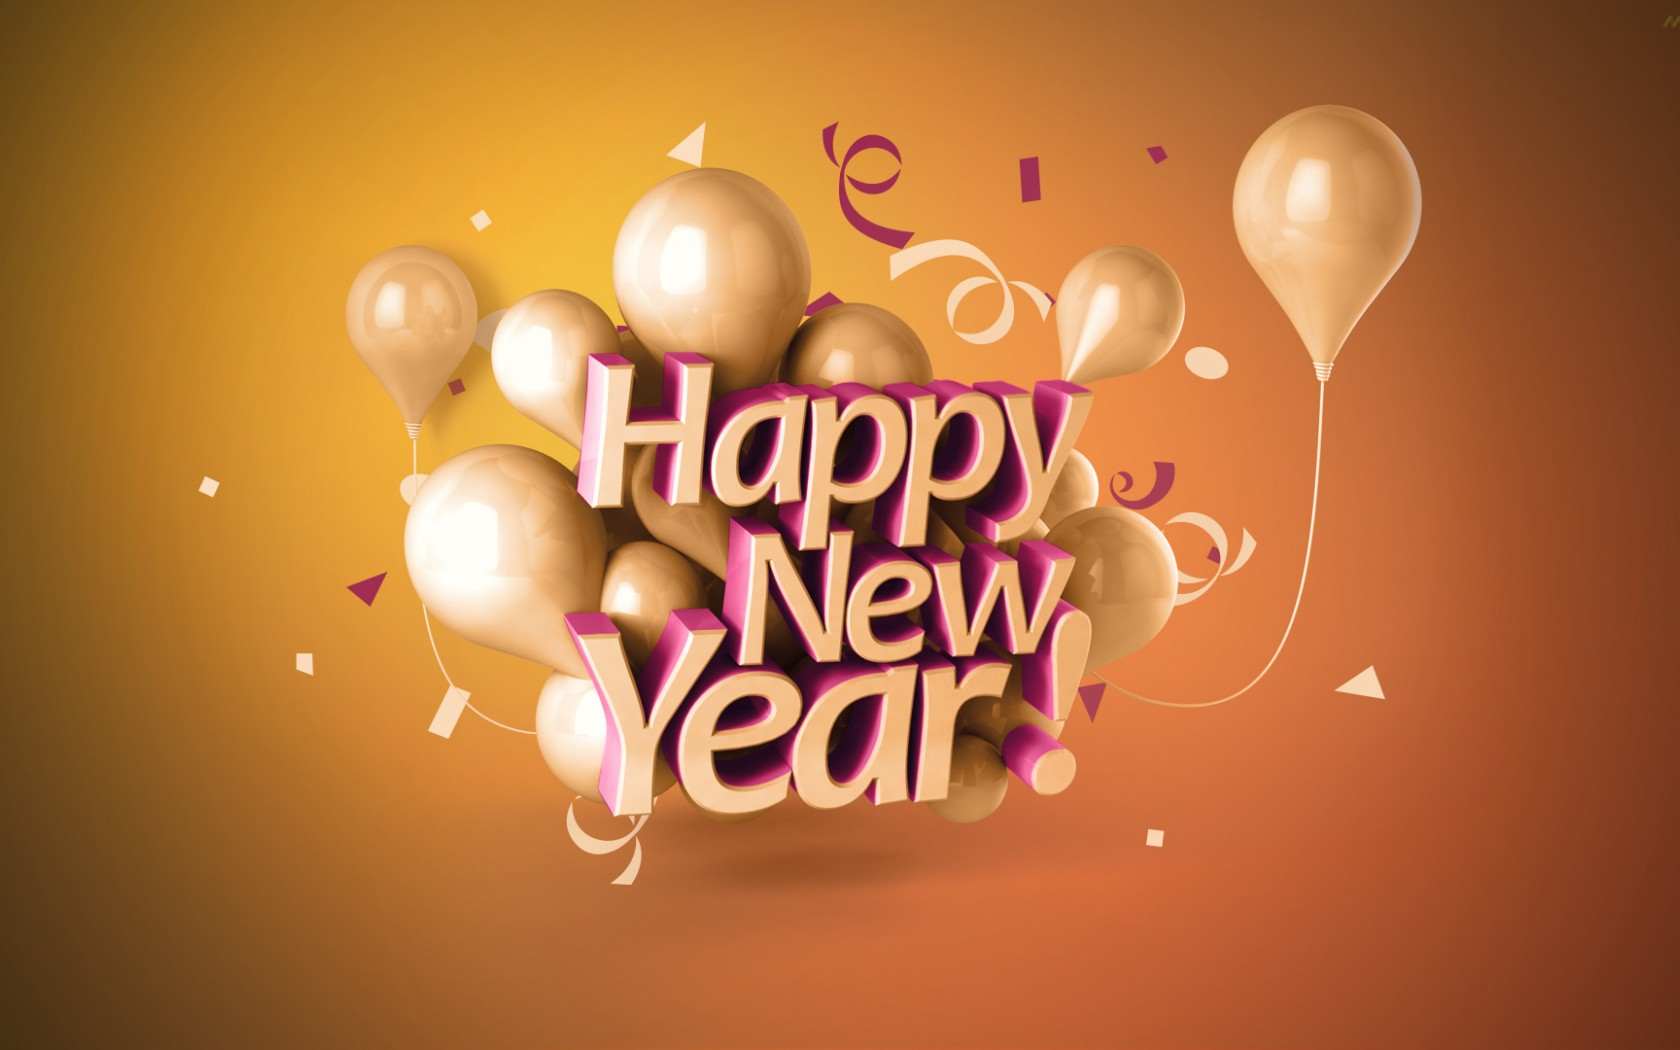 Happy New Year Wallpaper, New Year HD Image 2021